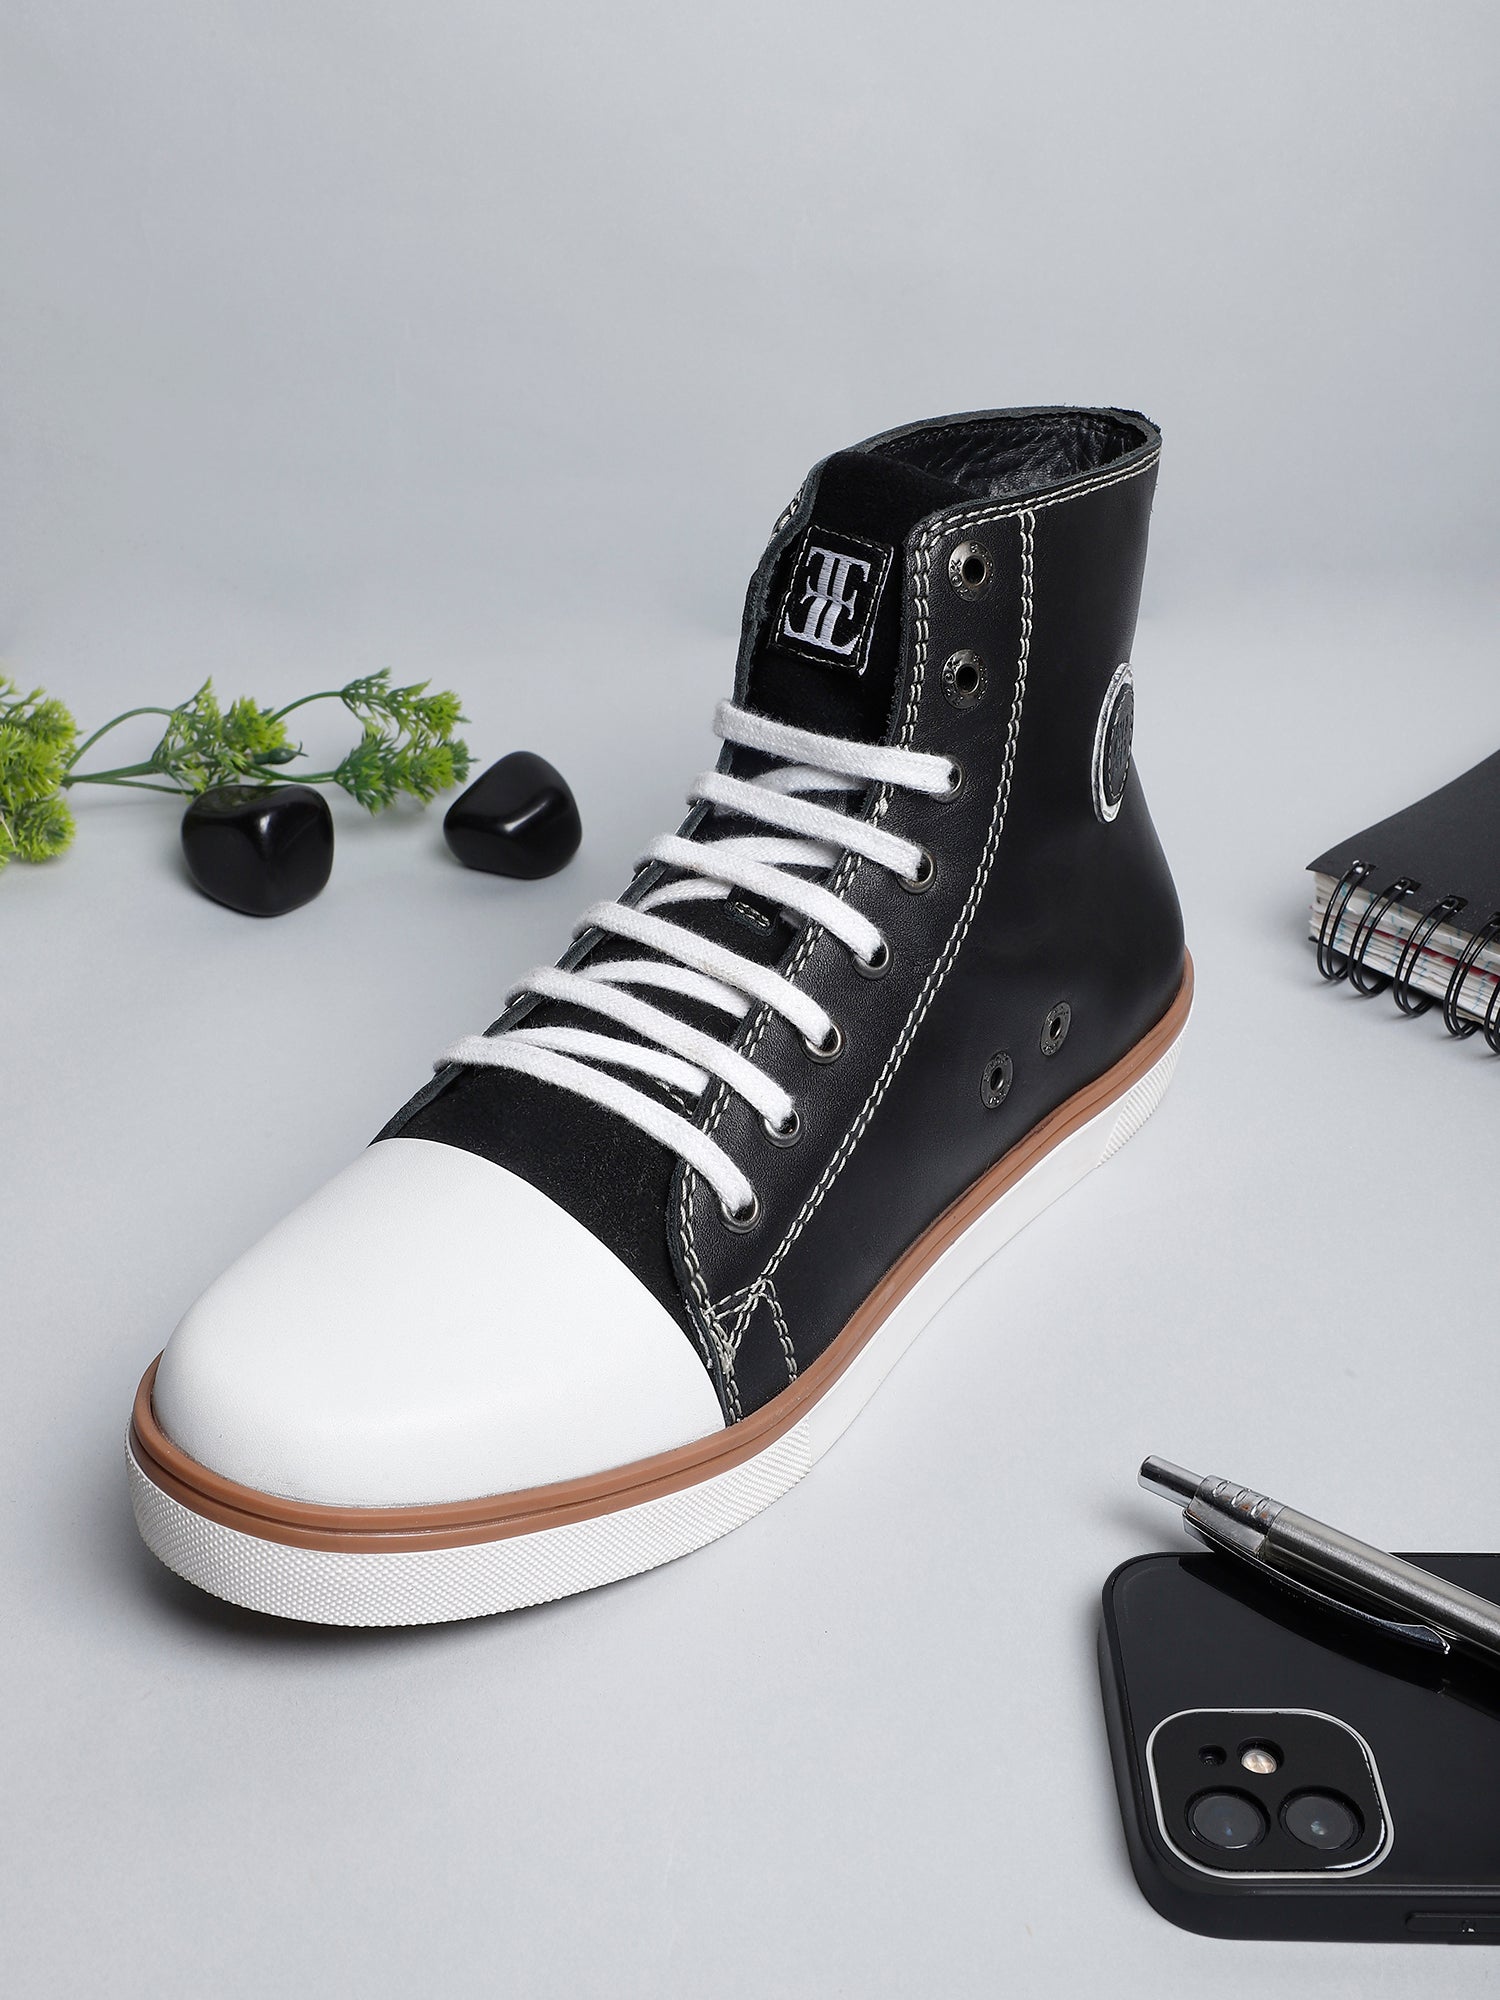 Explore Latest Range of Men's Casuals, Sneakers and Formal Footwear